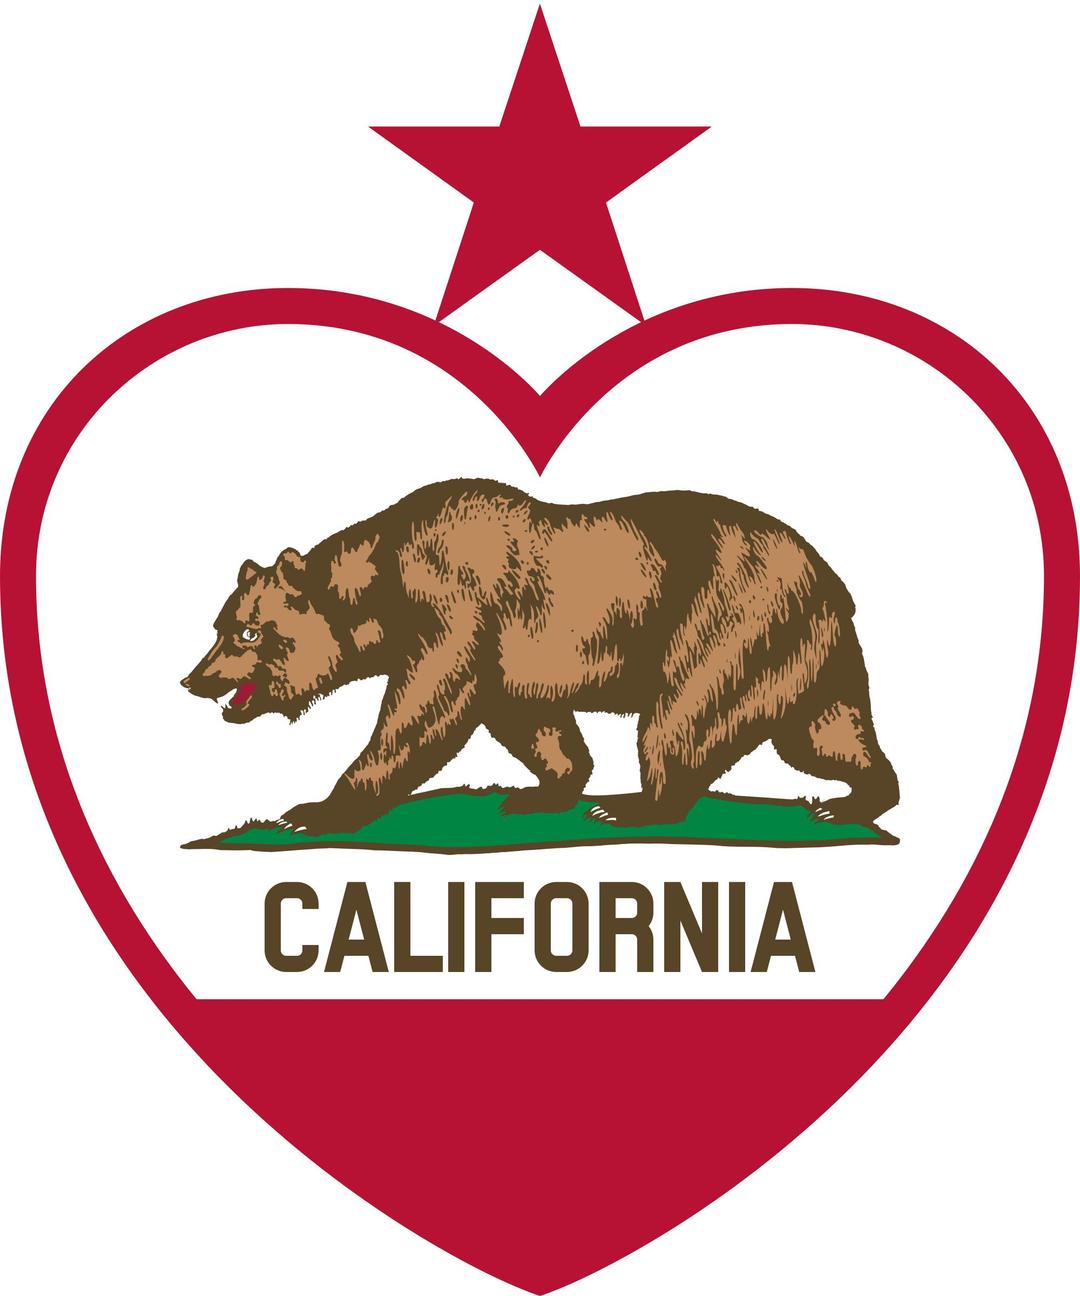 California Flag Heart - Star on Top png transparent